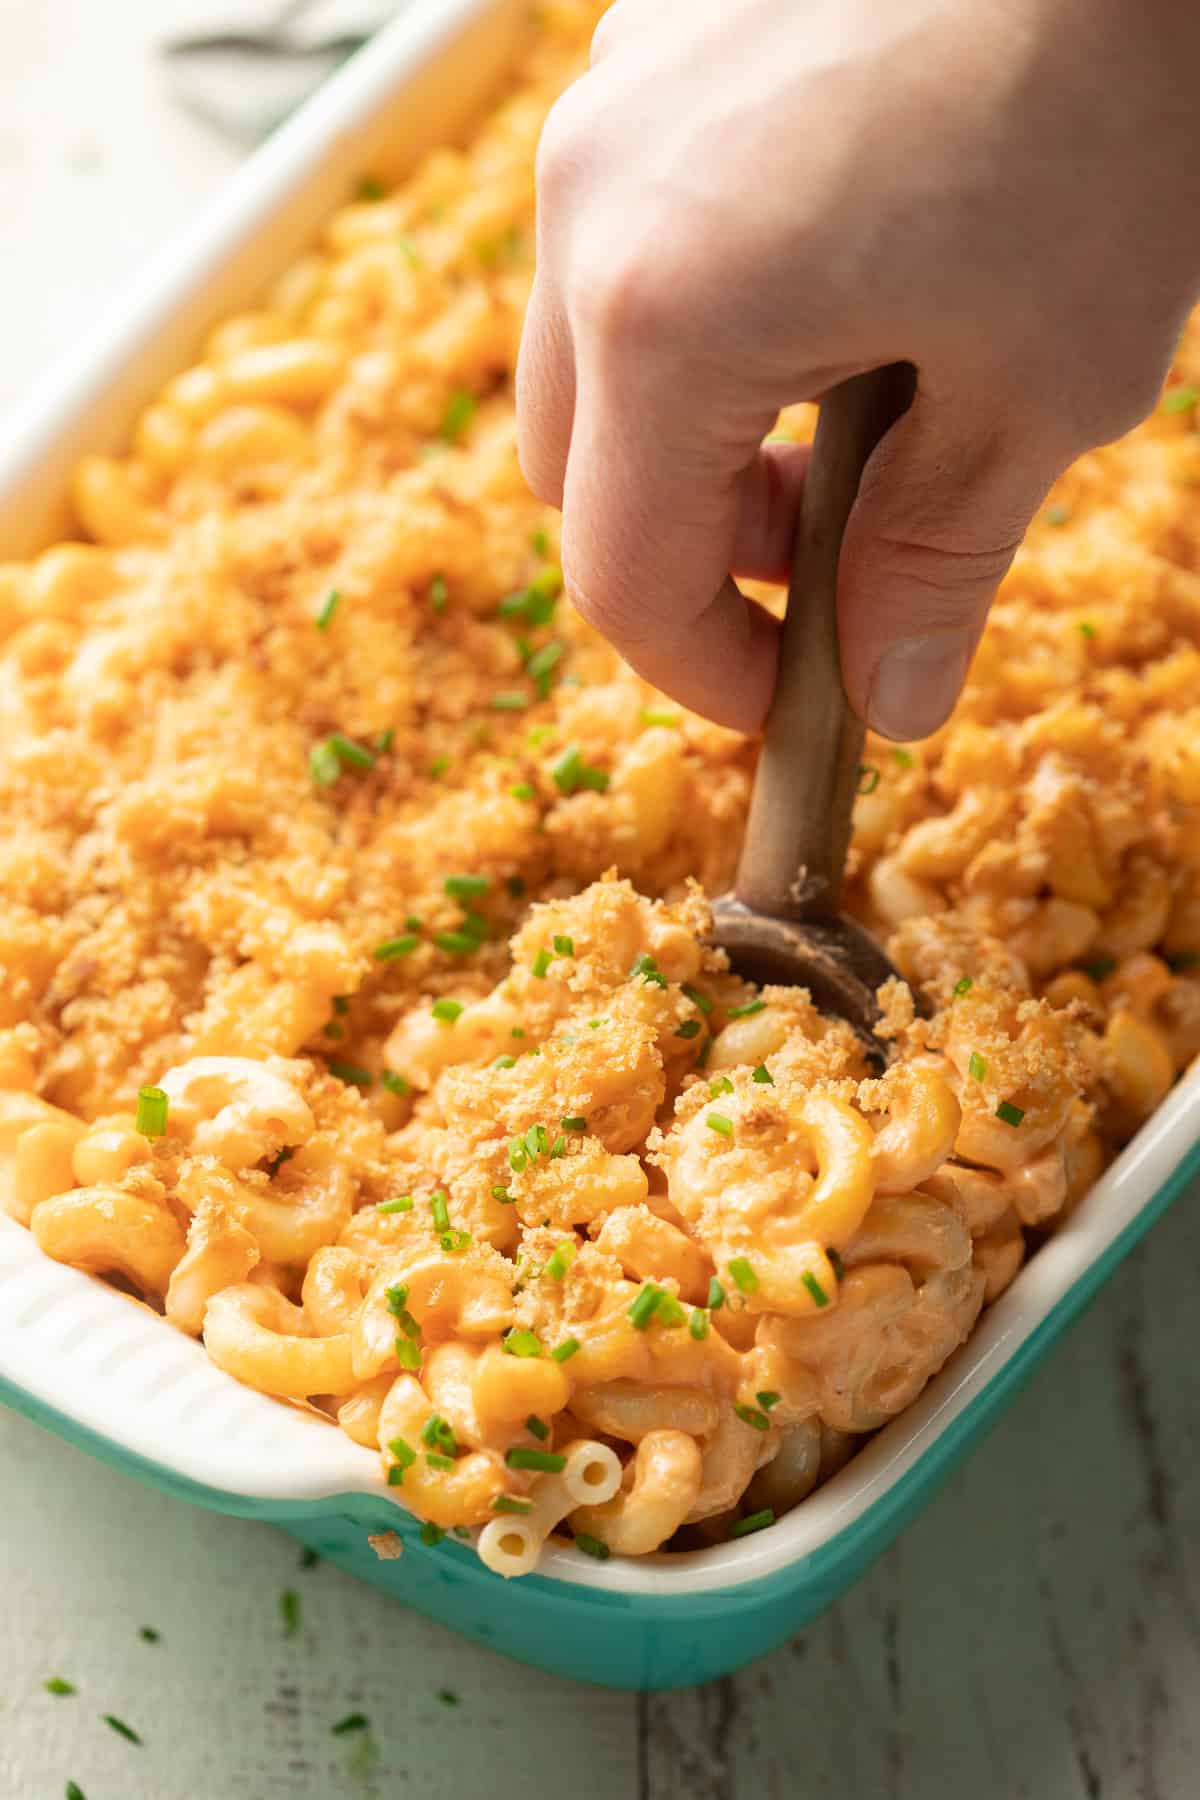 Hand using a spoon to scoop baked Vegan Mac & Cheese from a dish.